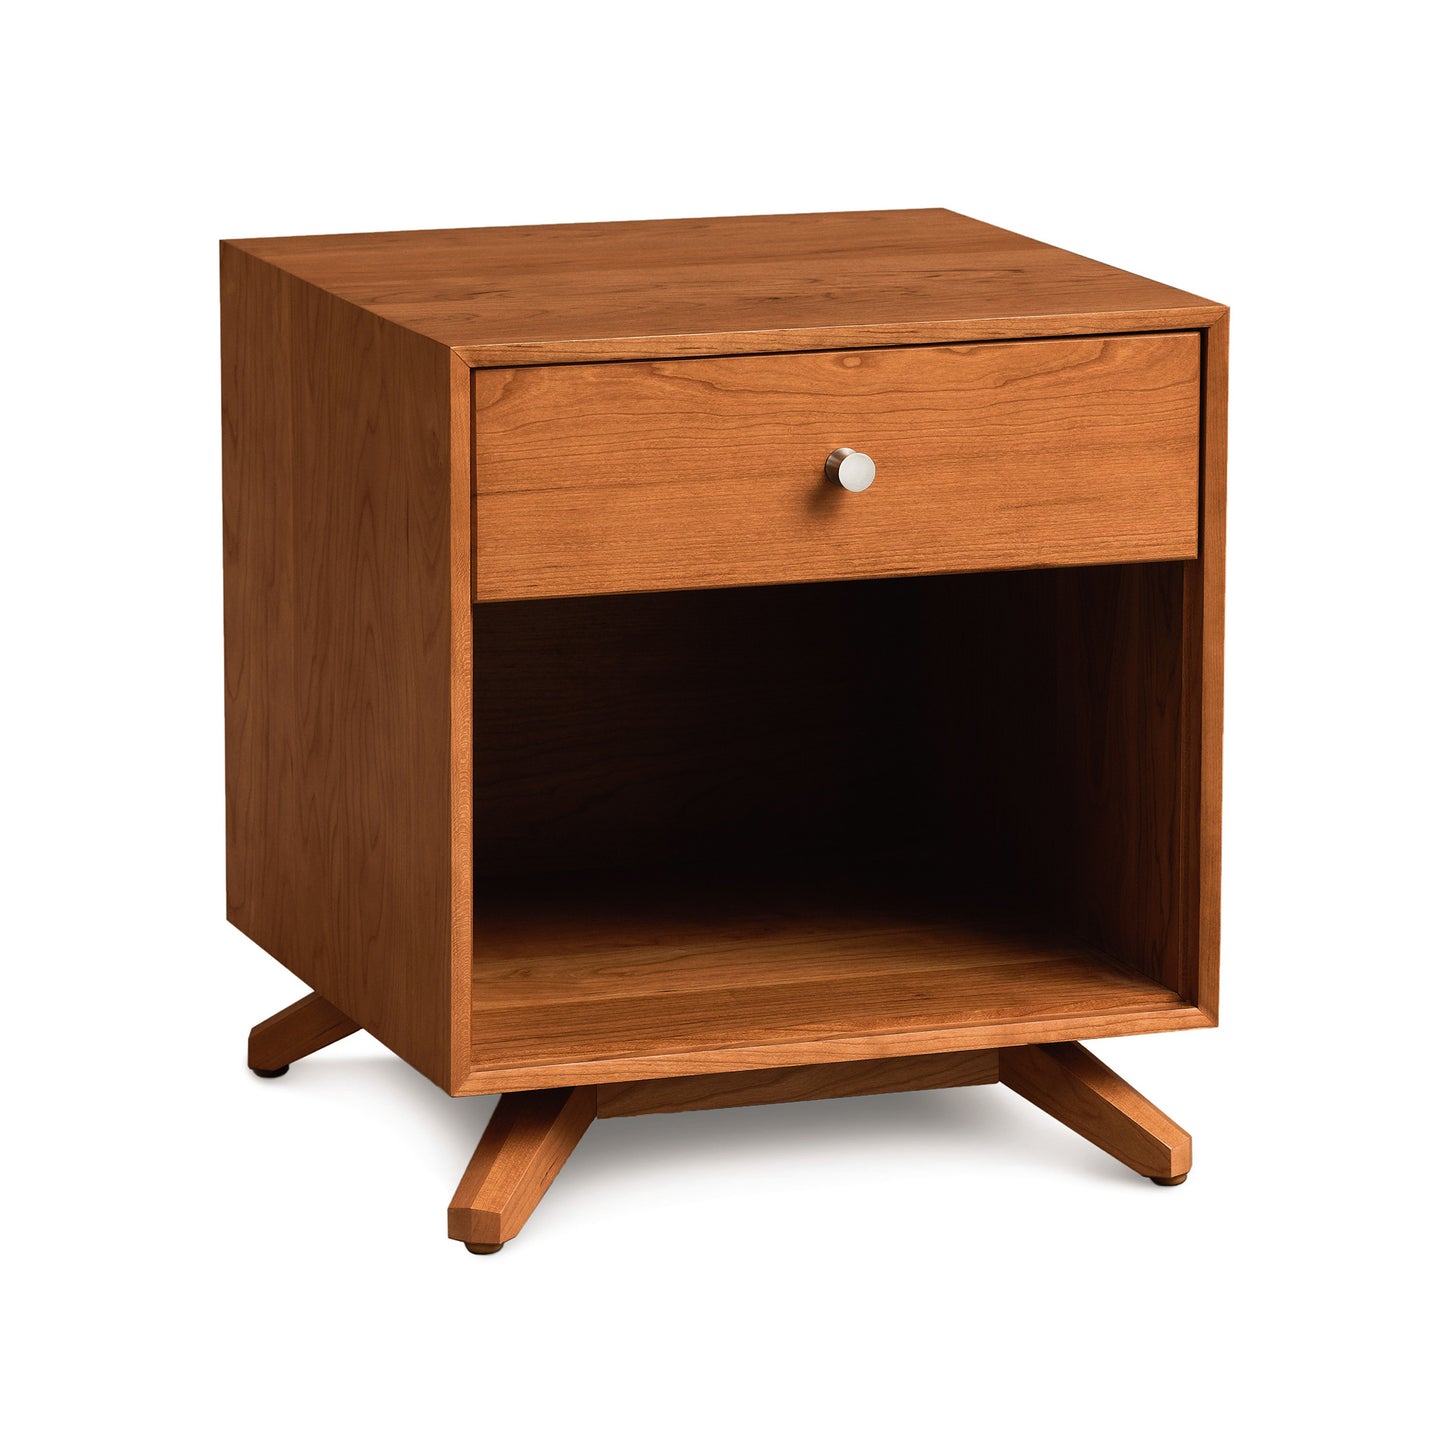 A modern American design nightstand, crafted from sustainable hardwood, with a single drawer and an open shelf, isolated on a white background. Introducing the Astrid 1-Drawer Enclosed Shelf Nightstand by Copeland Furniture.